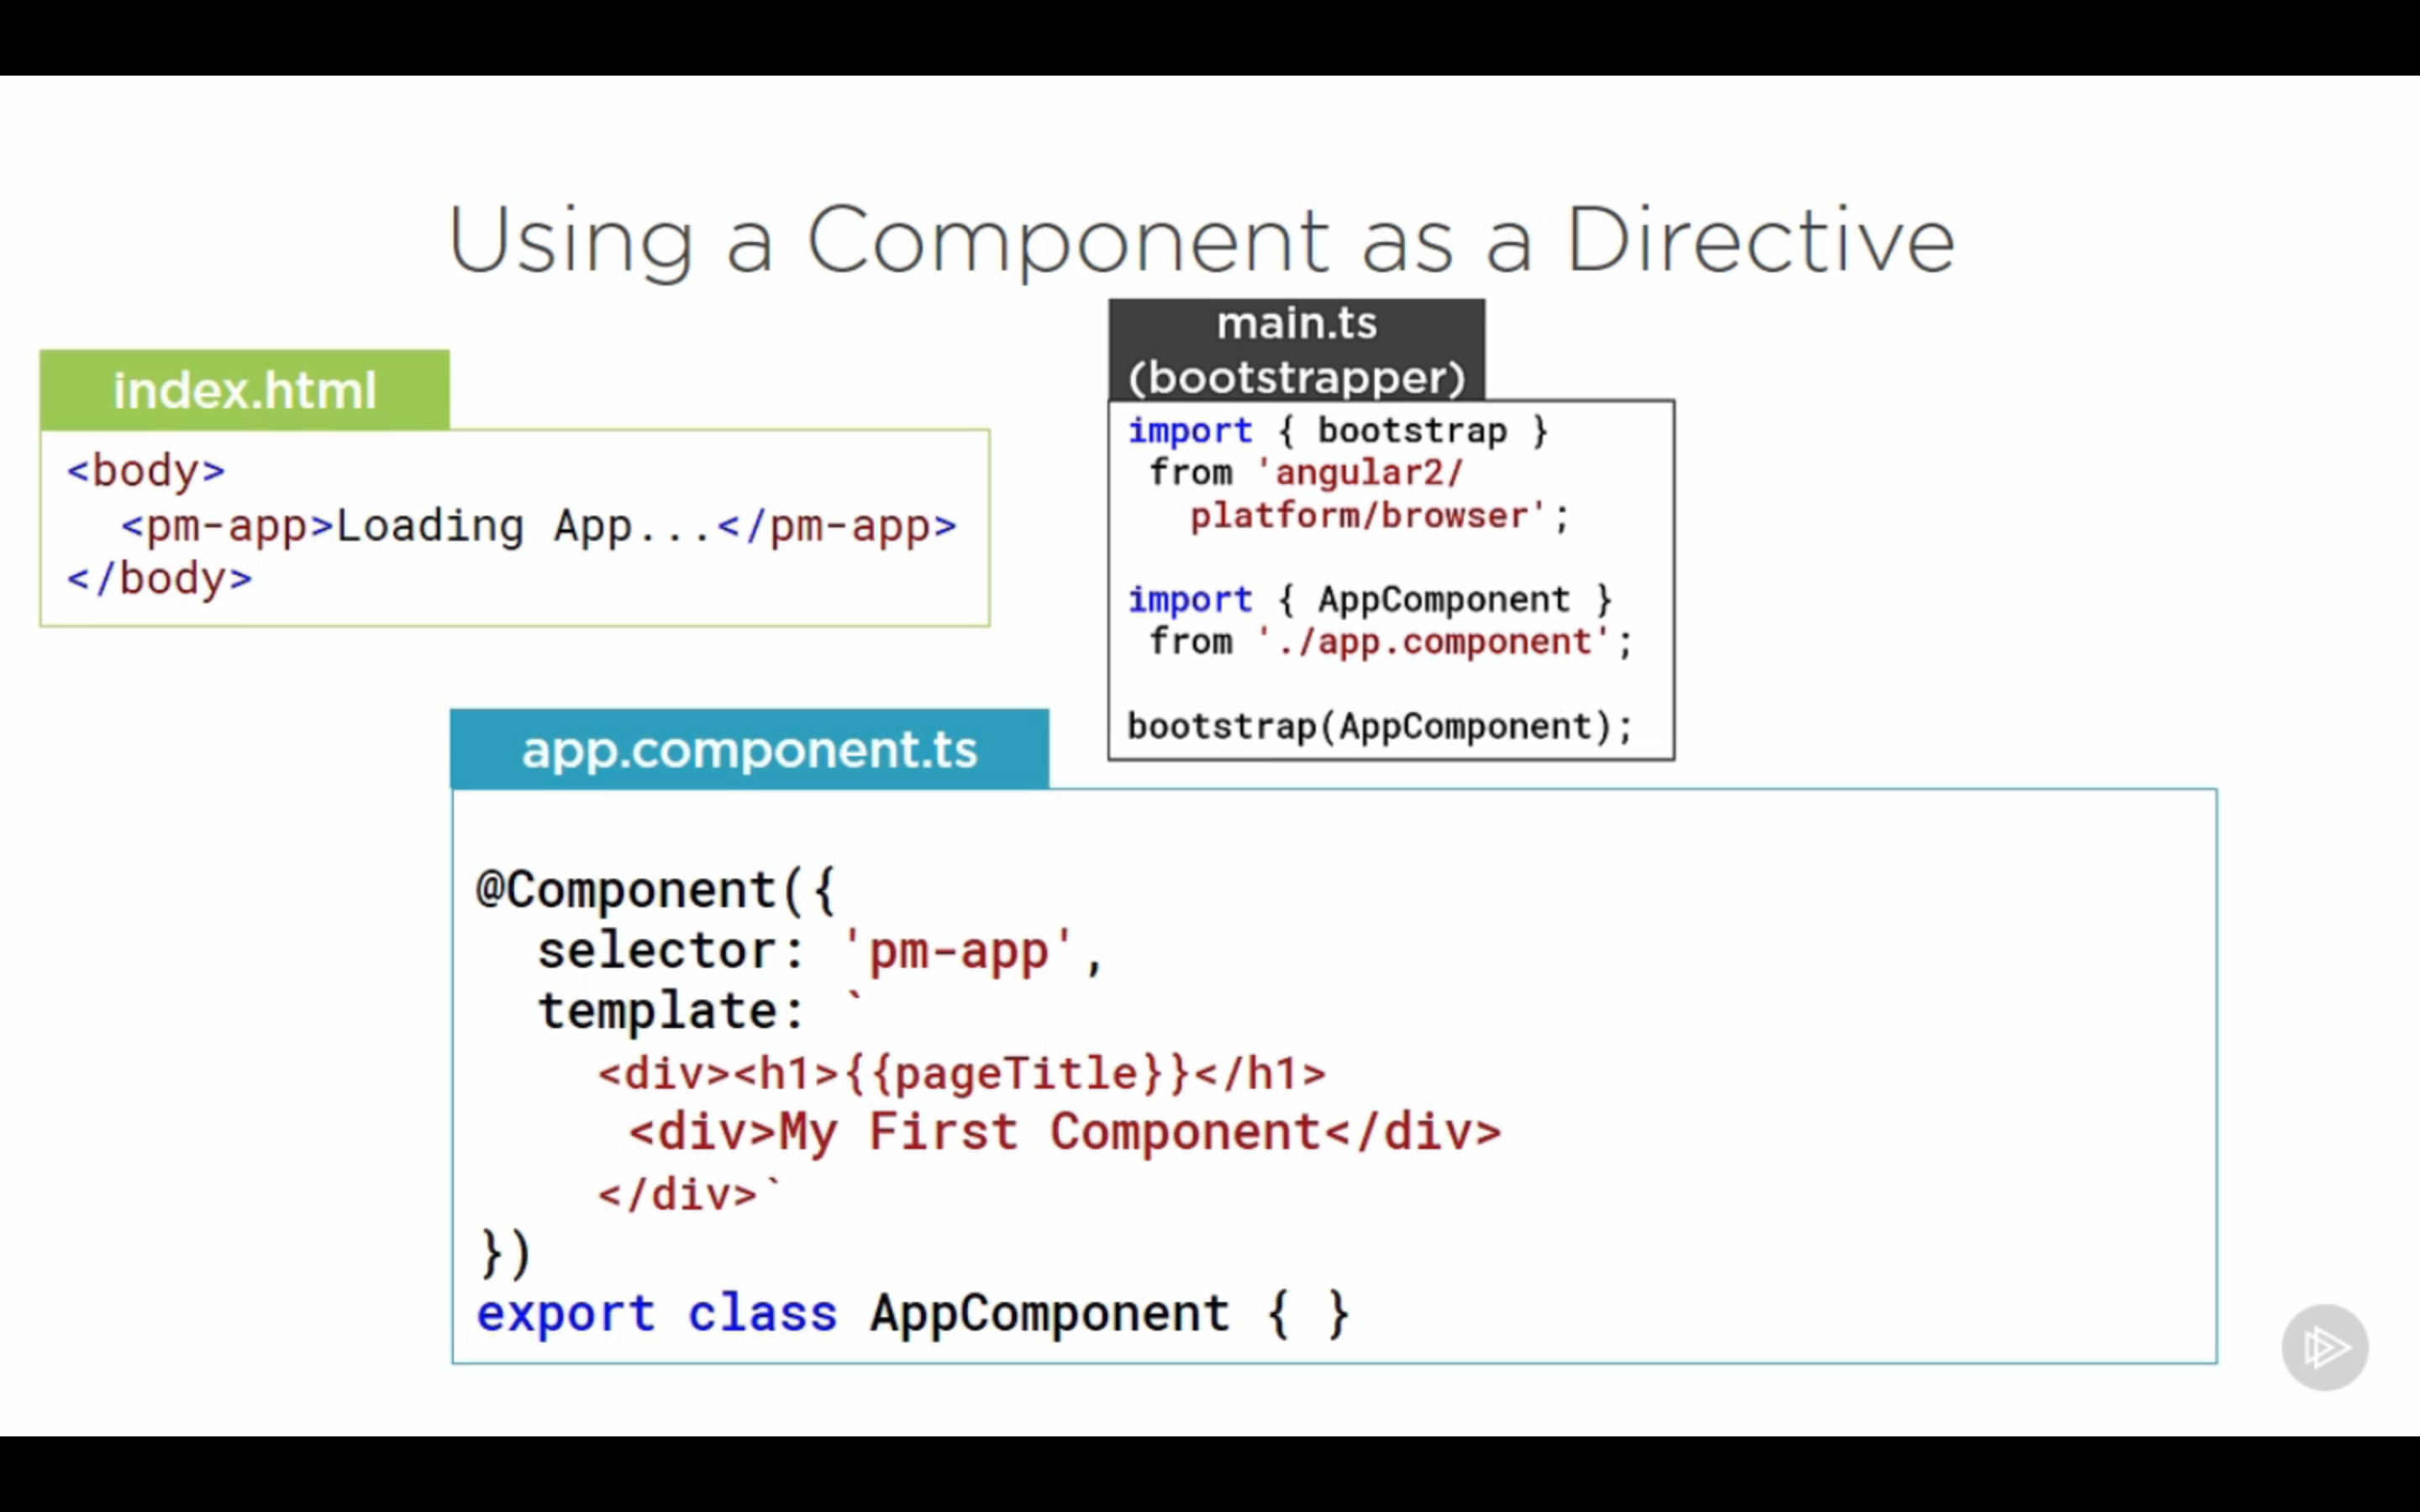 using component as directive implemented by defining in main.ts